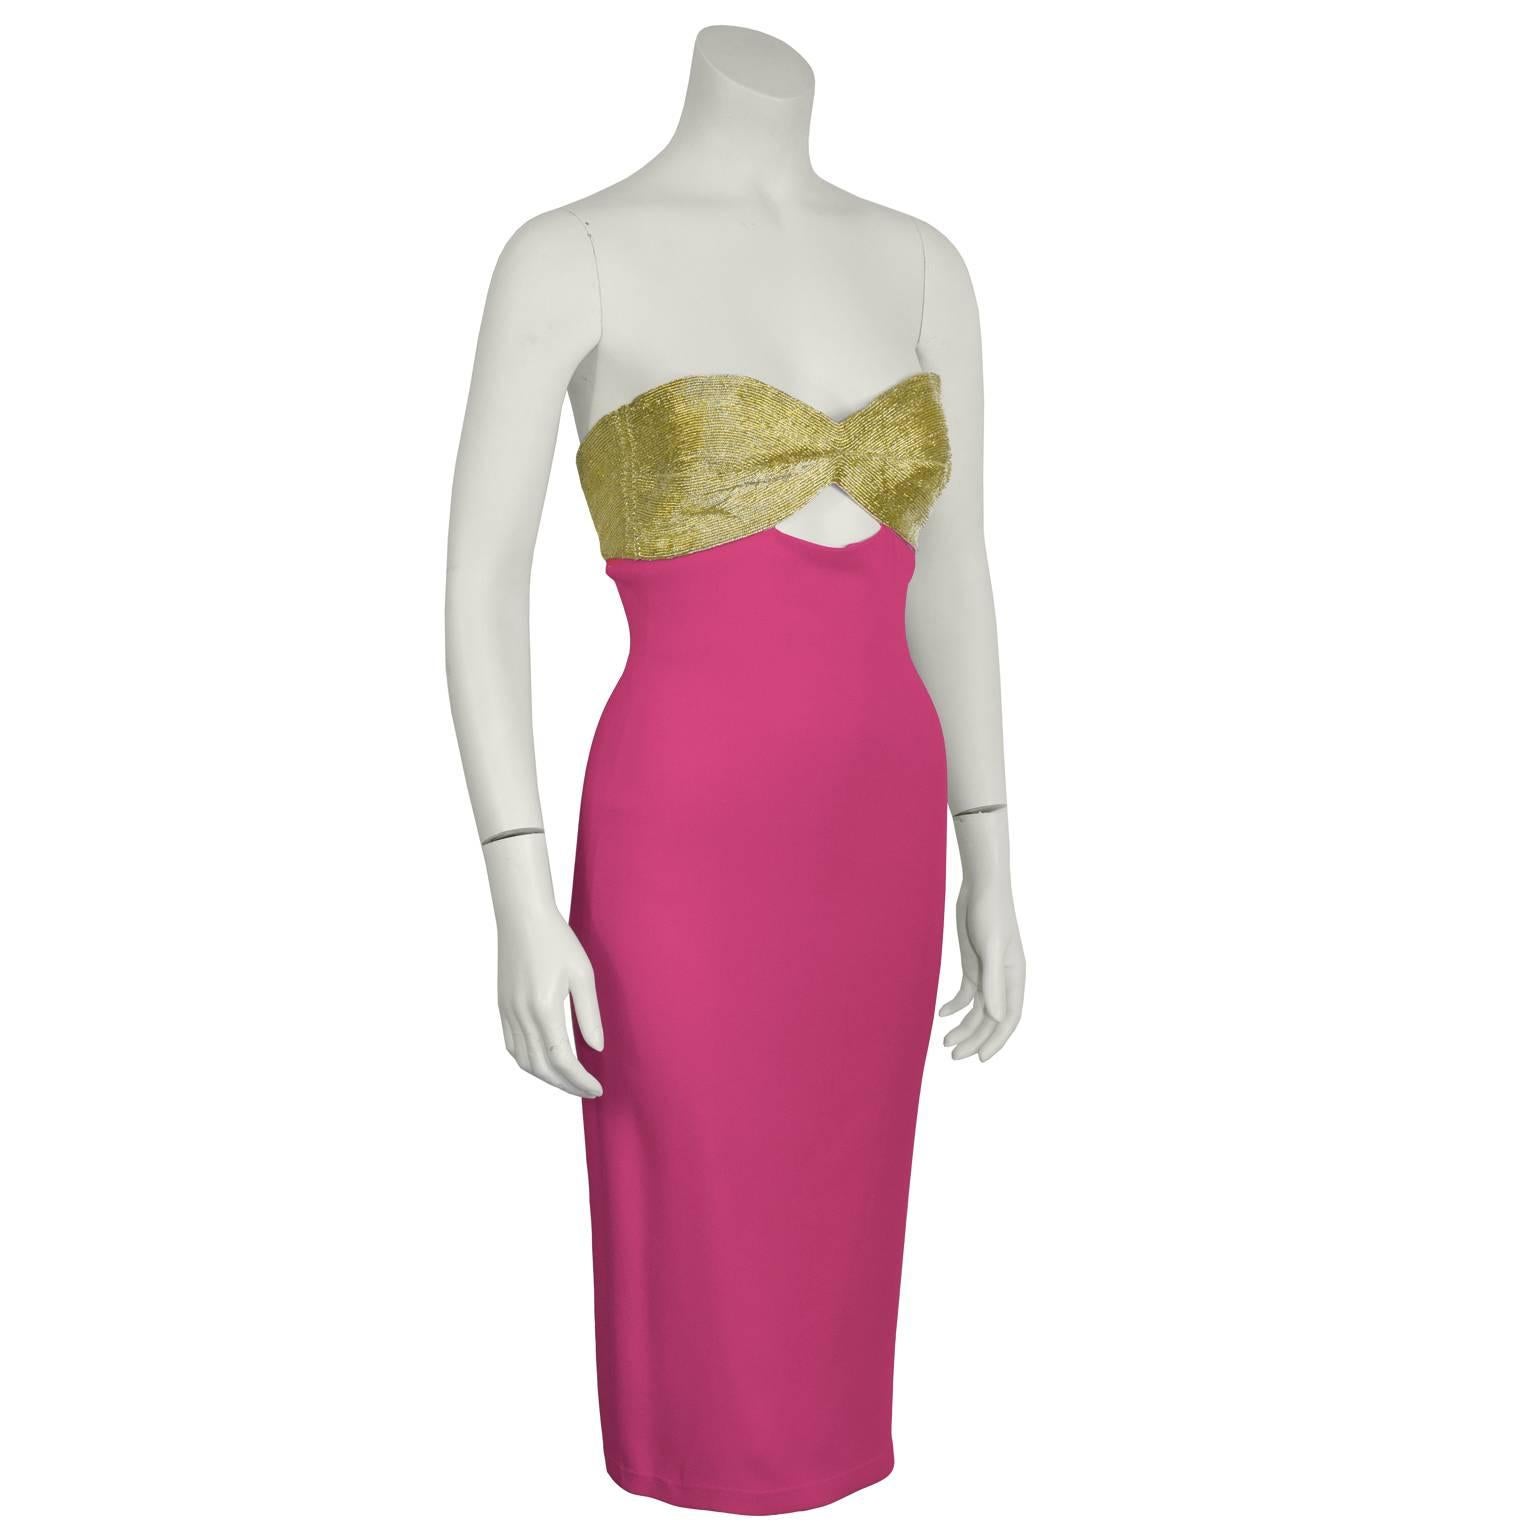 Oh la la  this is a sexy Celine hot pink strapless cocktail dress from their Spring 2004 collection. Gold corded bra-like top with a keyhole opening below the bust, finishes with a hot pink fitted silk mini dress. Hidden back zip closure. Featured